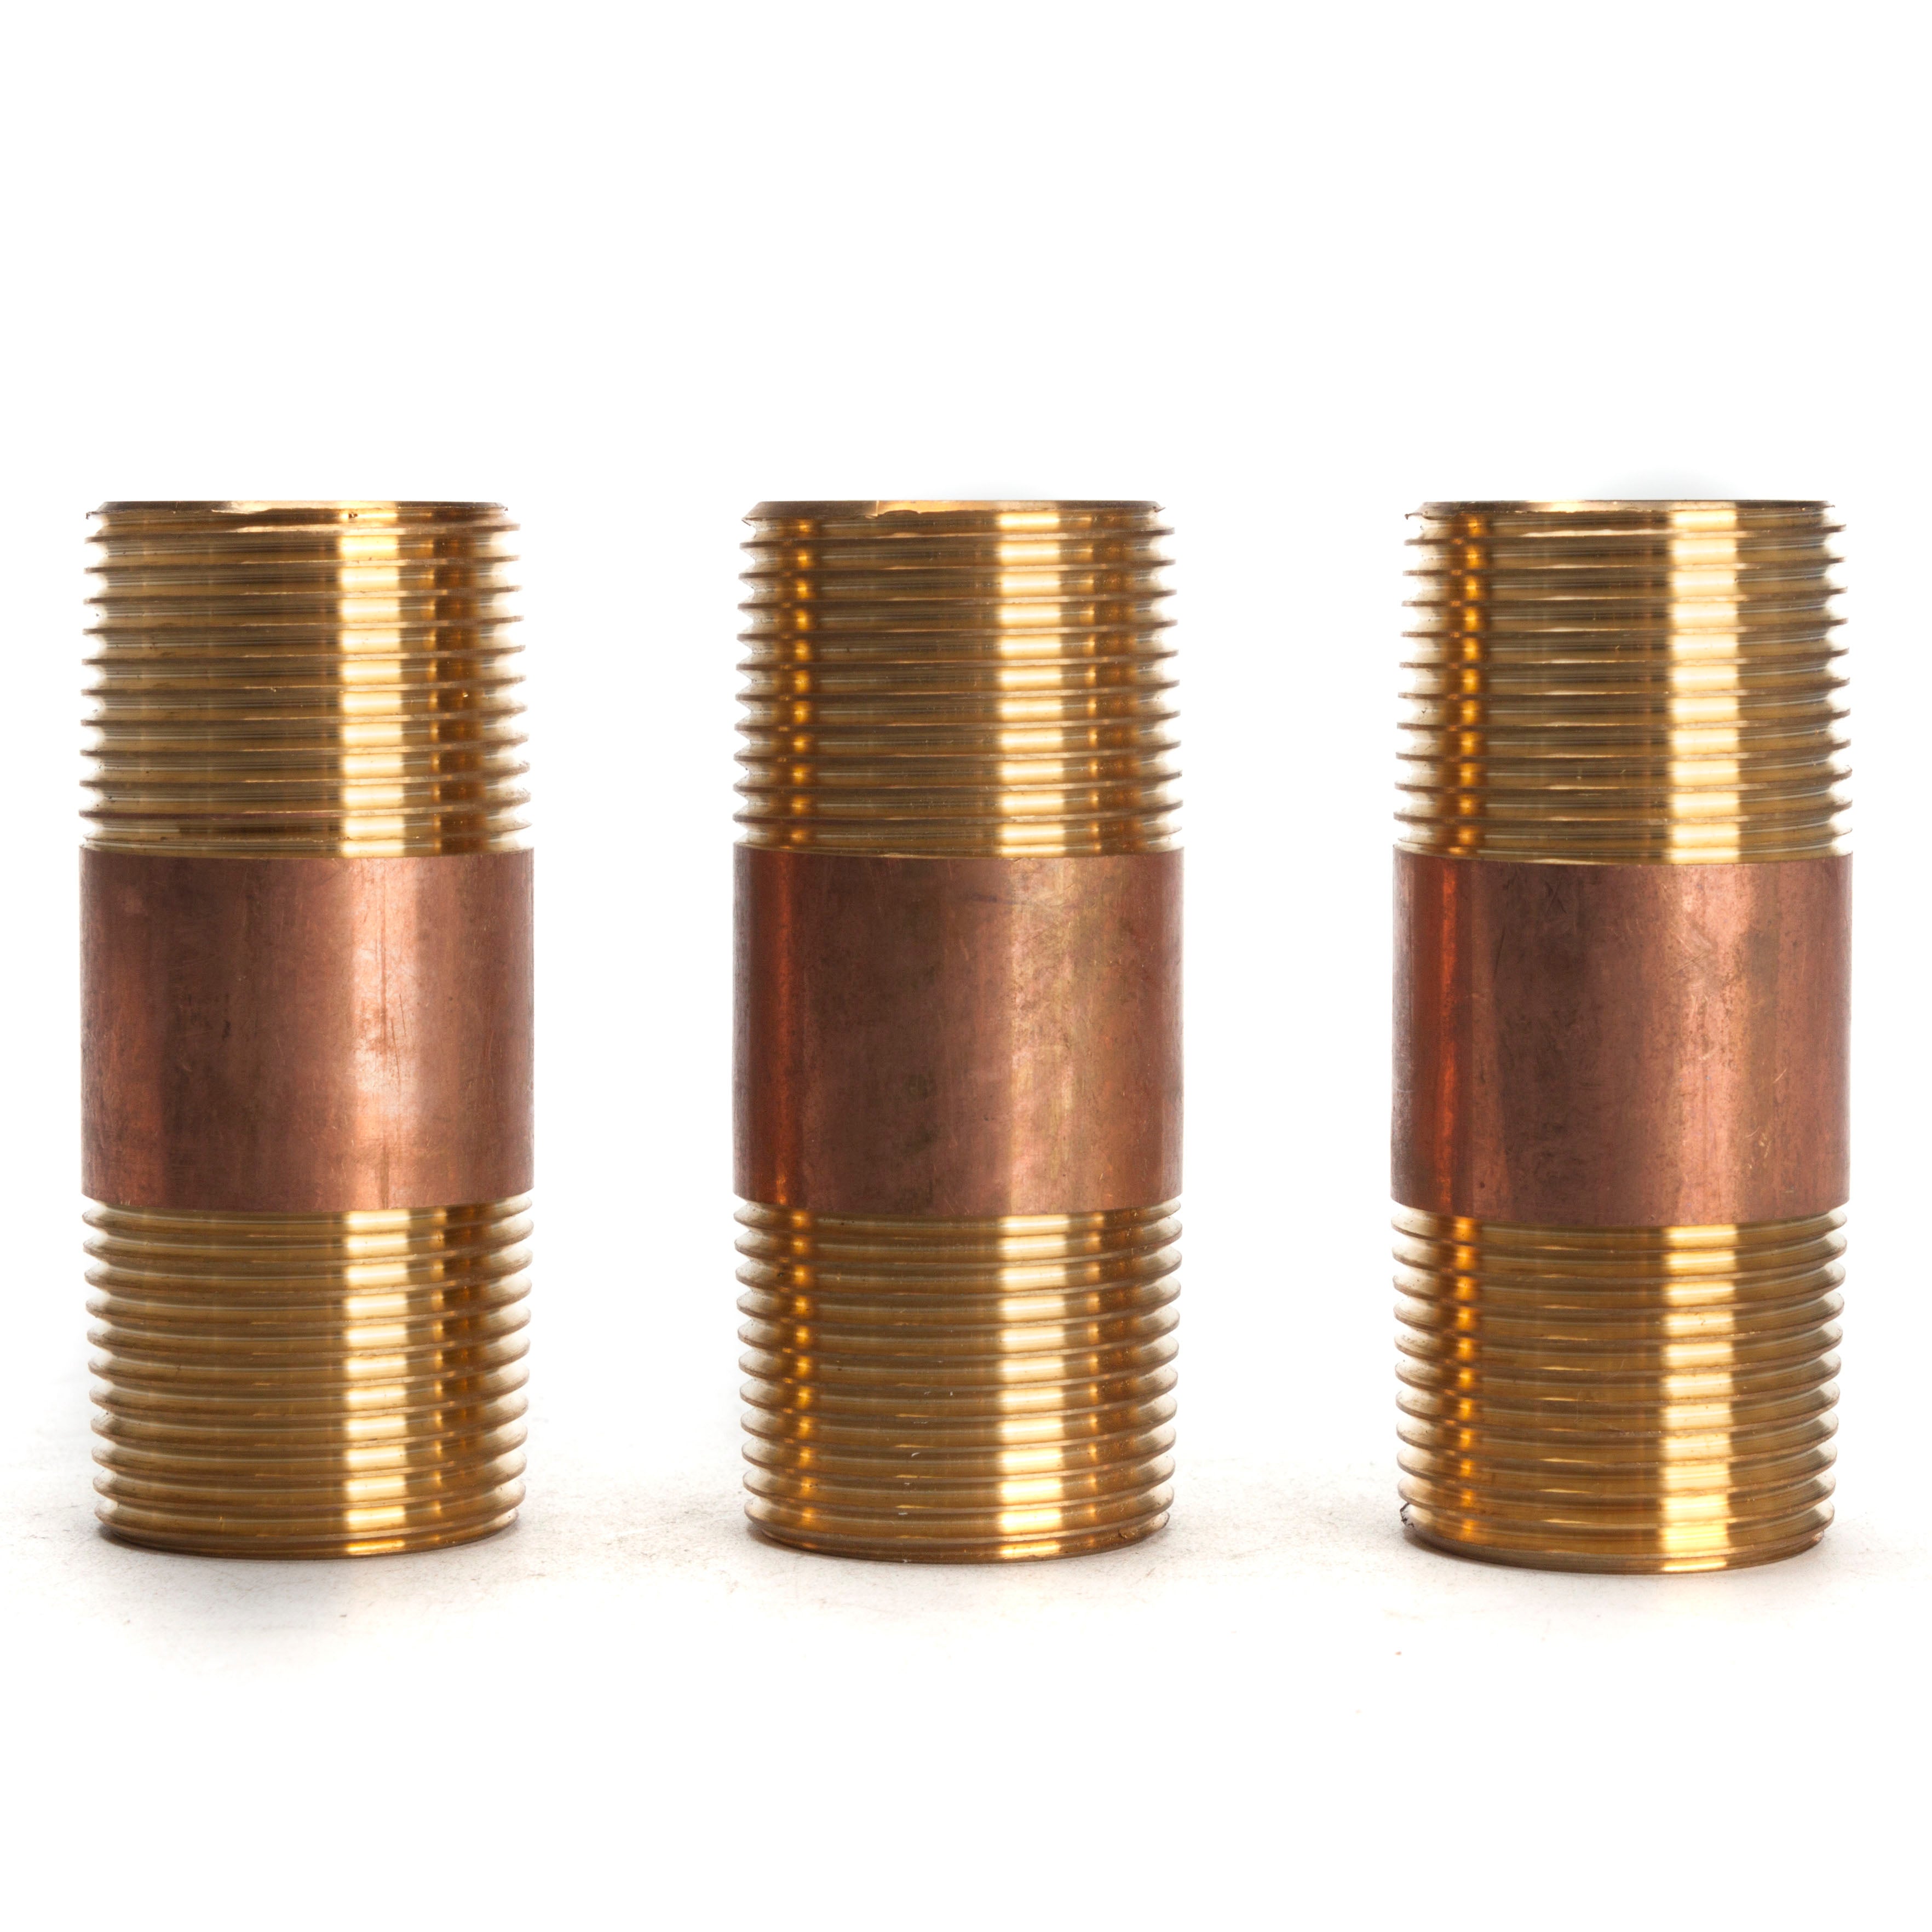 LTWFITTING Brass Pipe 3 Inch Long Nipples Fitting 1 Inch Male NPT Air Water(Pack of 3)